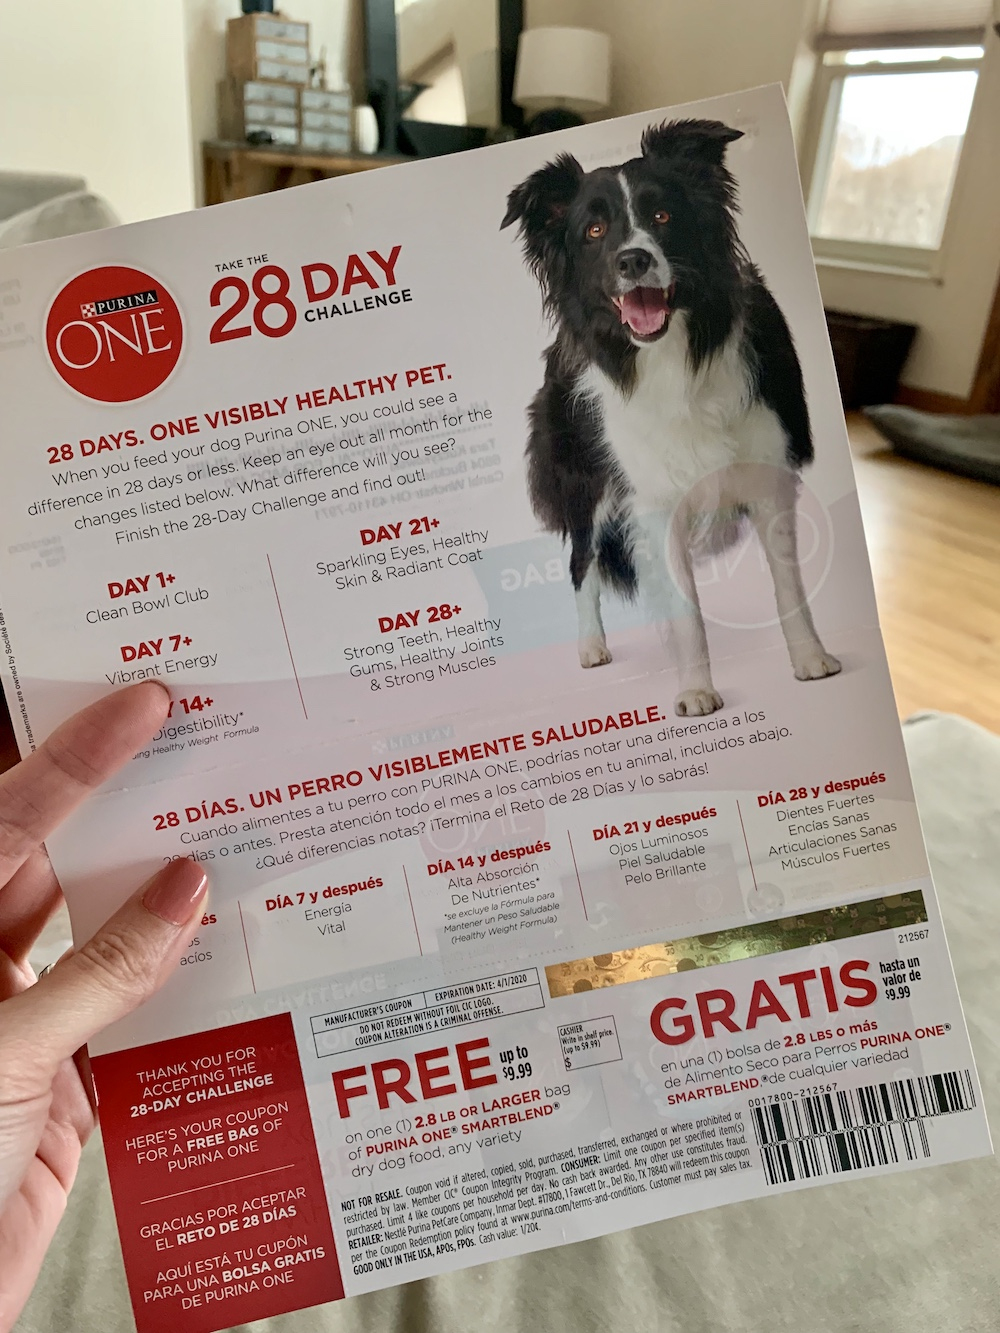 My Free Bag Of Purina One Dog Food Coupon Came Today! - Deal Seeking Mom - Free Printable Coupons For Purina One Dog Food